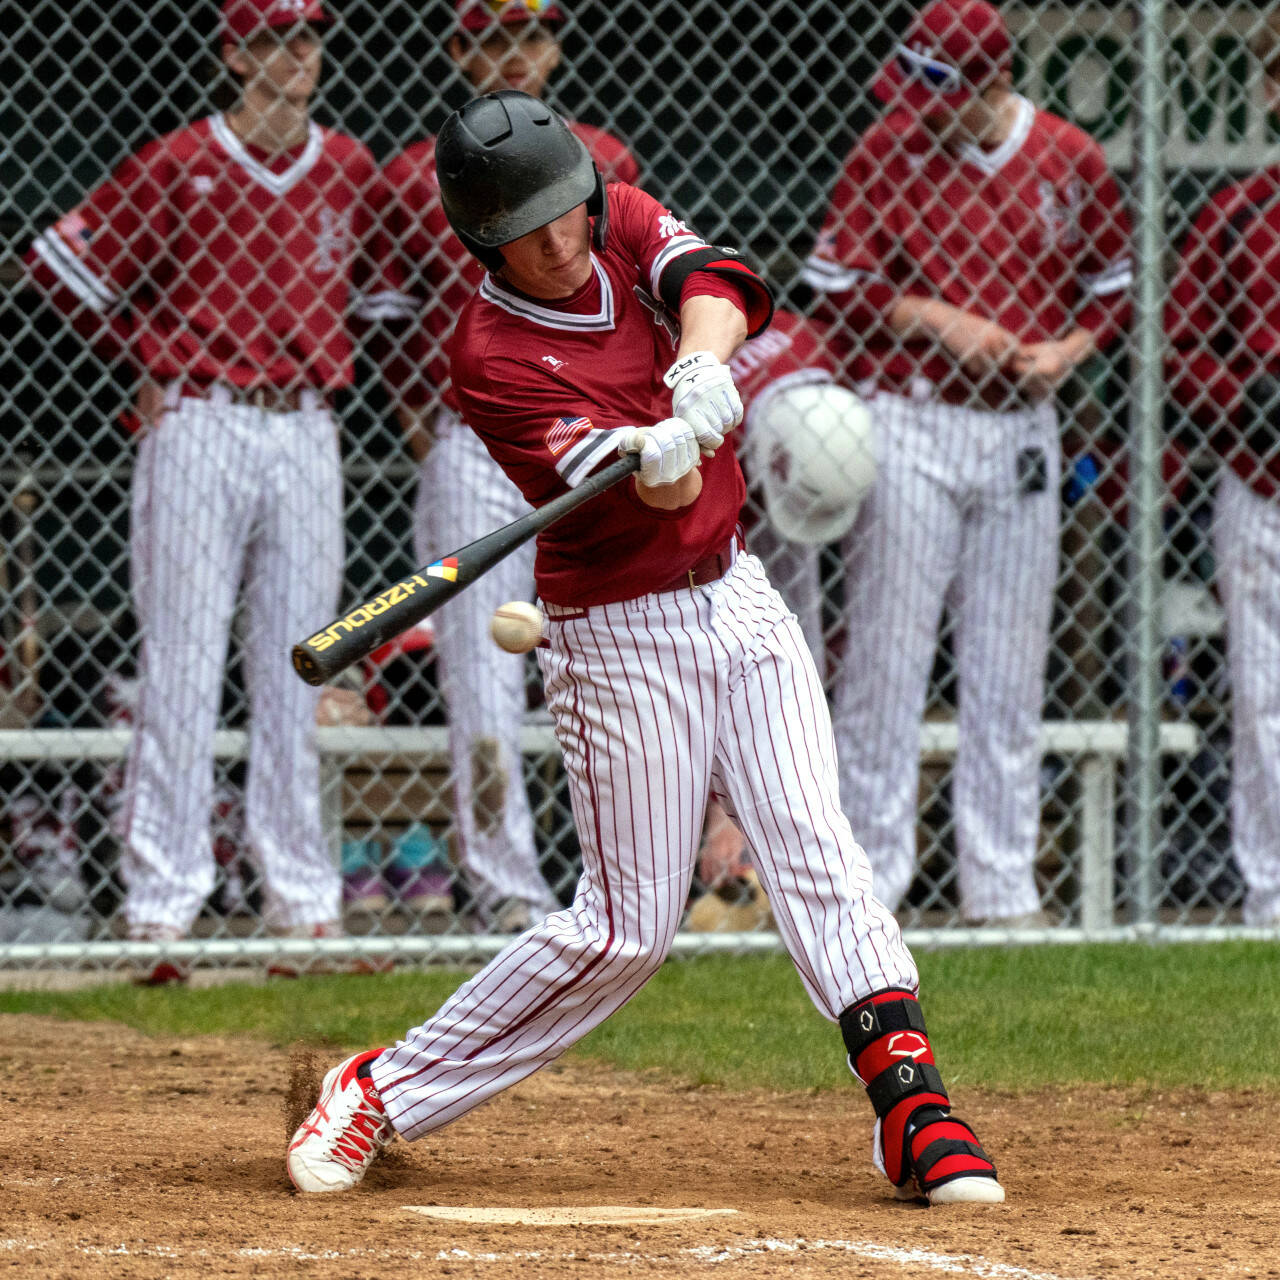 PHOTO BY FOREST WORGUM Hoquiam’s Riley Montoure, seen here in a file photo, had two hits in the Grizzlies’ 17-3 win over Mt. Tahoma on Monday in Hoquiam.